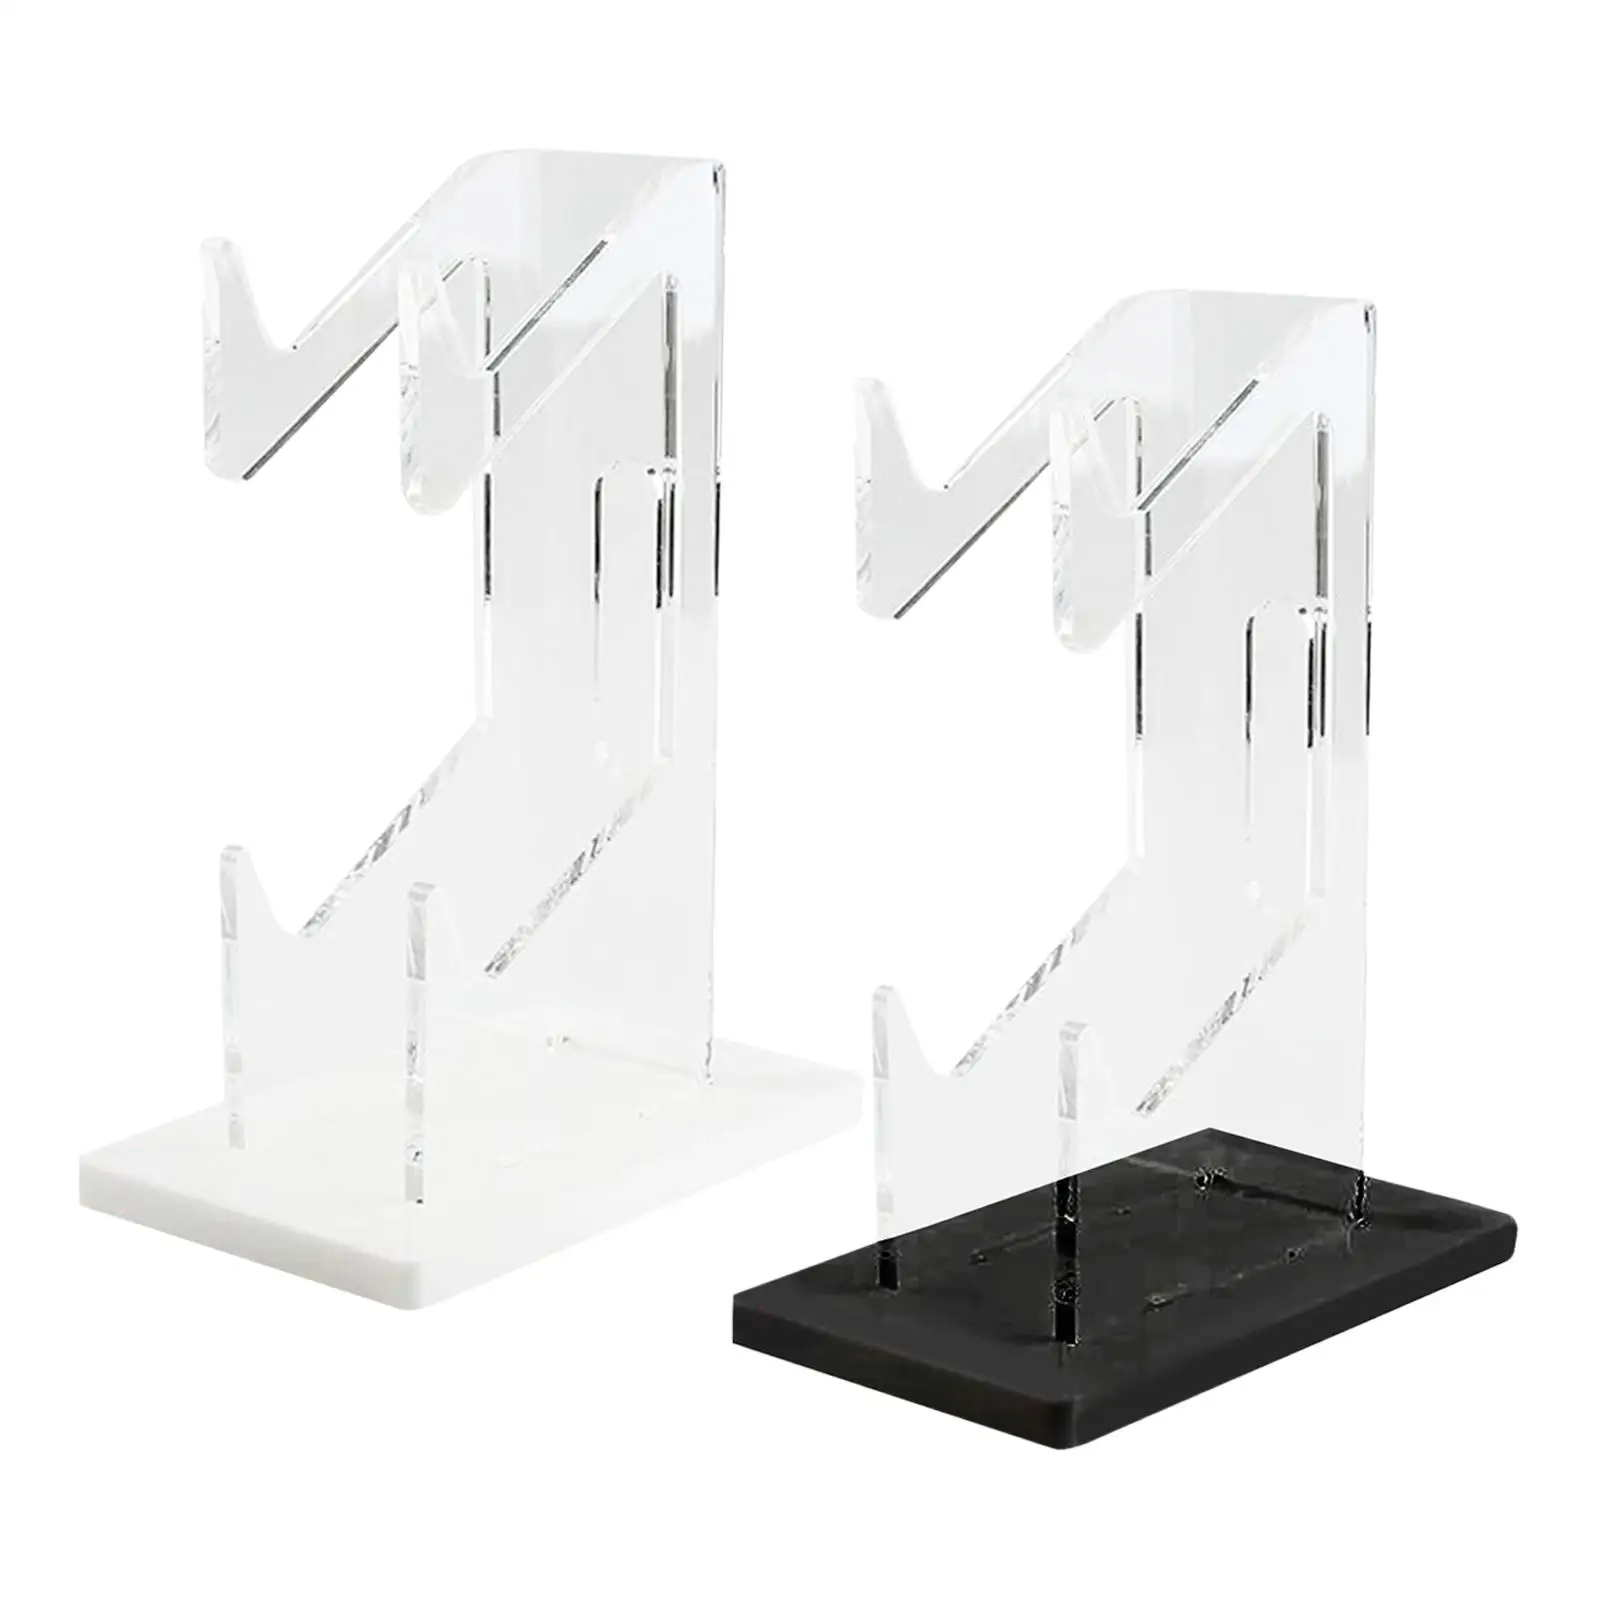 Gamepad Holder Acrylic Display Bracket Game Console Controller Stand Gaming Desk Accessories for PS5/PS4/ One/S/x Series